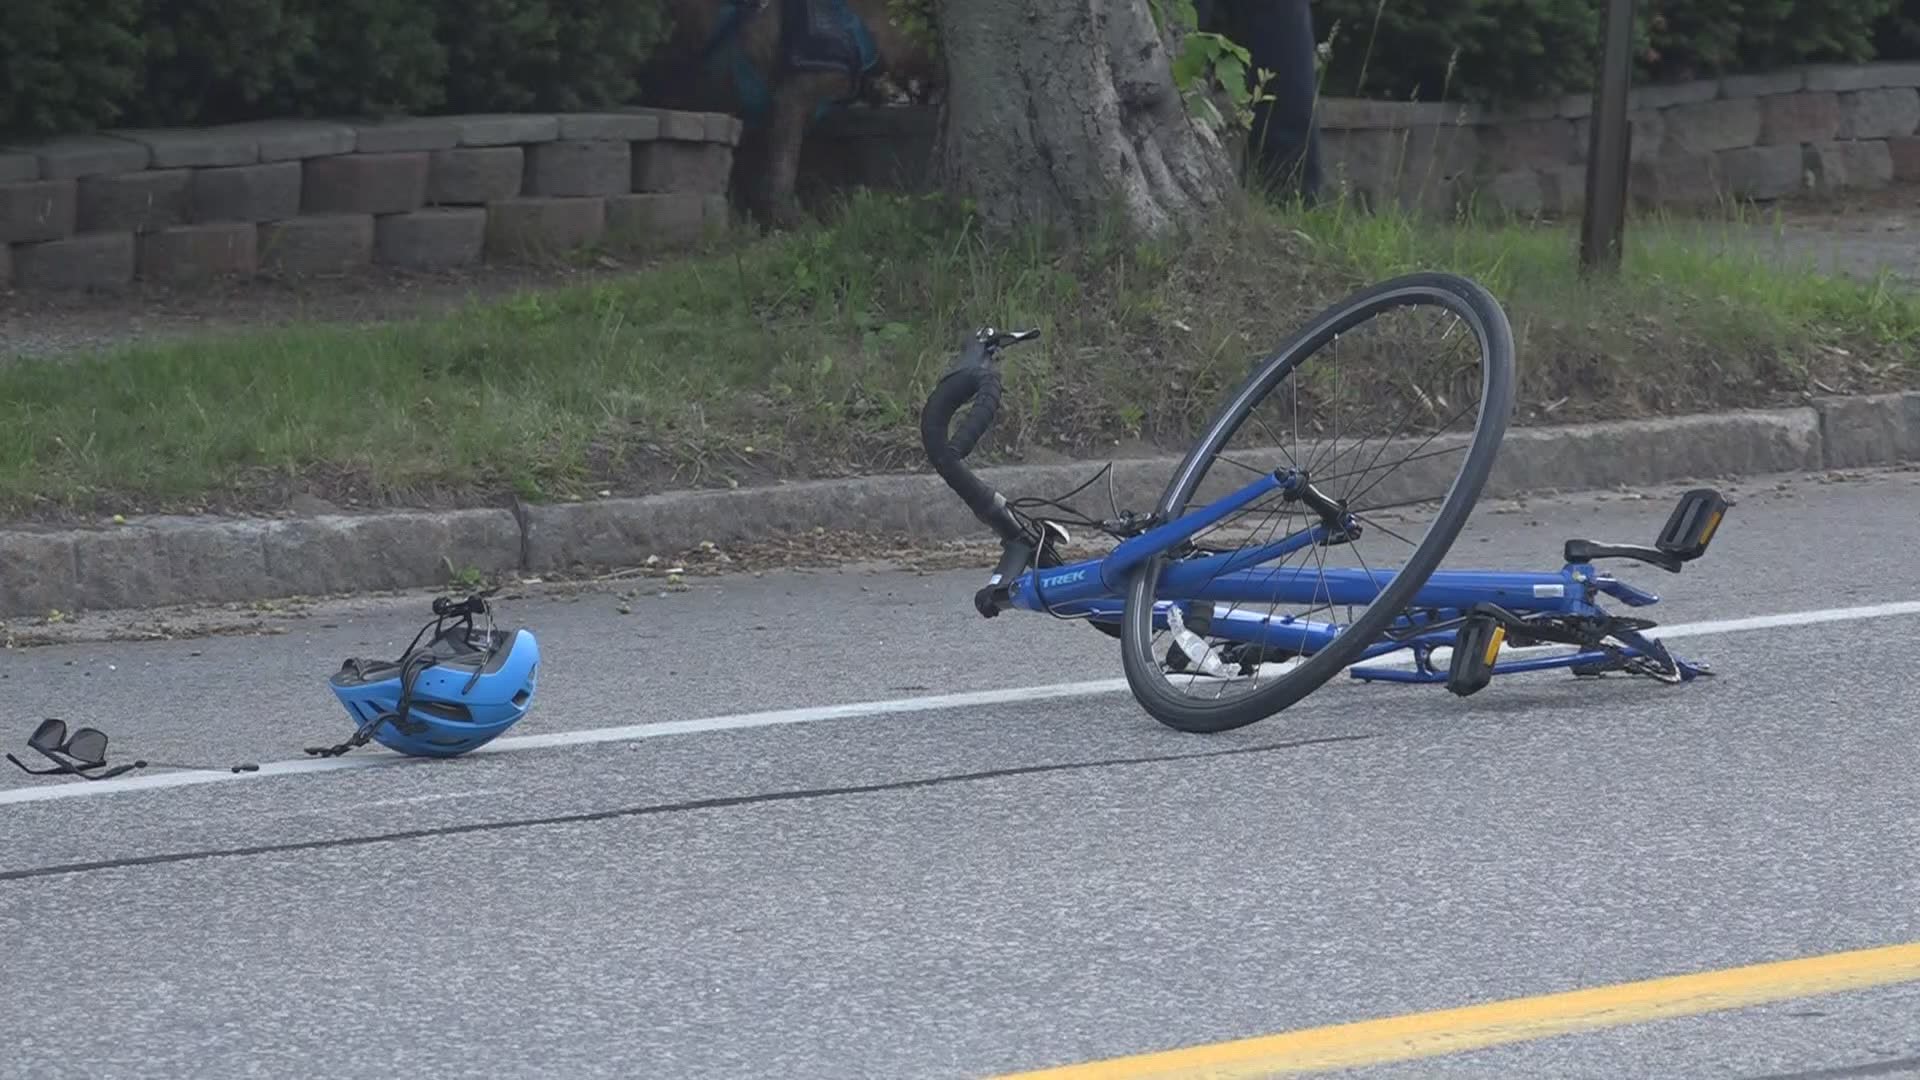 Police said the cyclist, a 36-year-old man was taken to the hospital with serious injuries